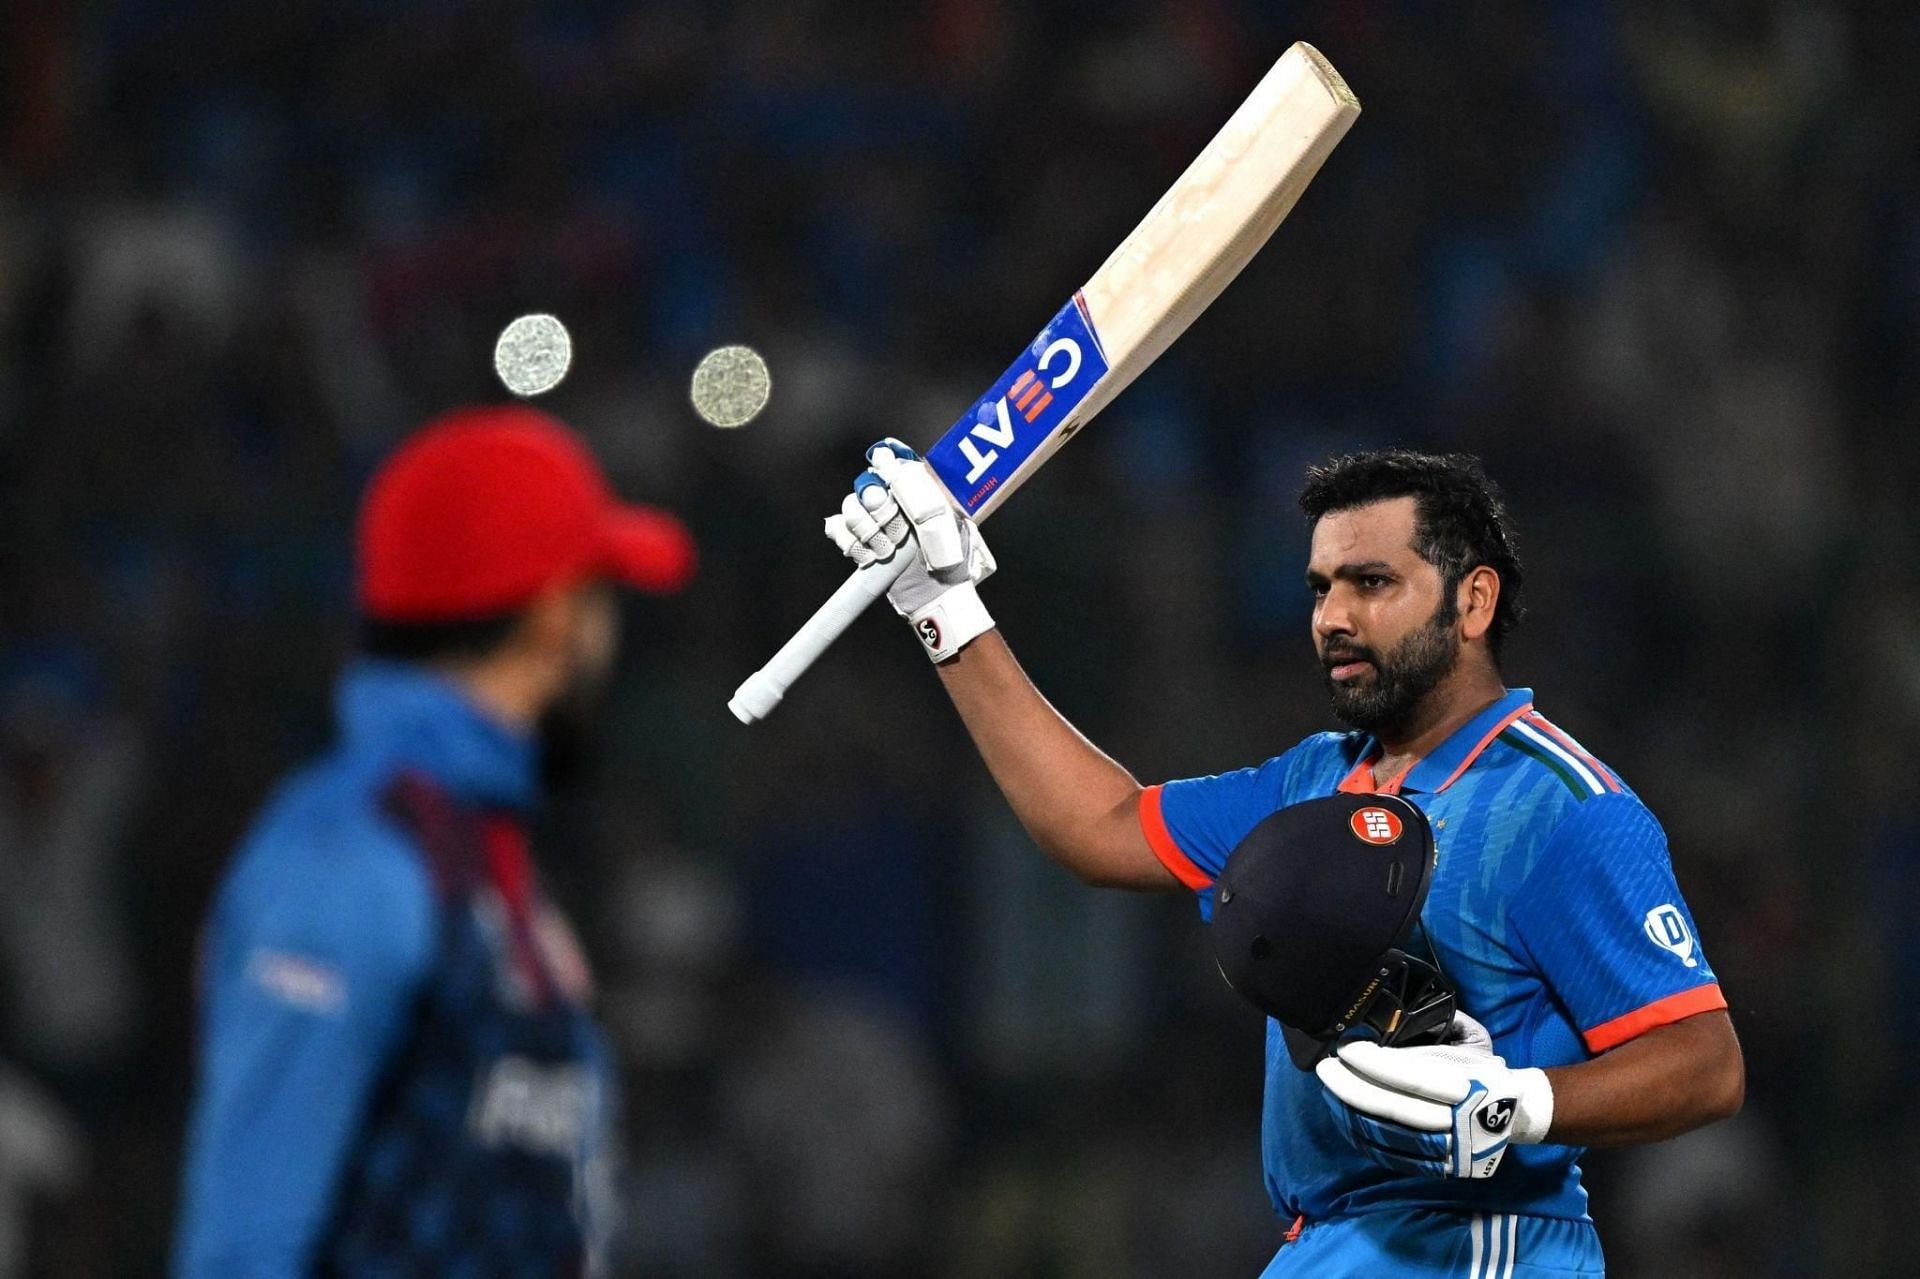 Rohit Sharma raising his bat after a century [Getty Images]